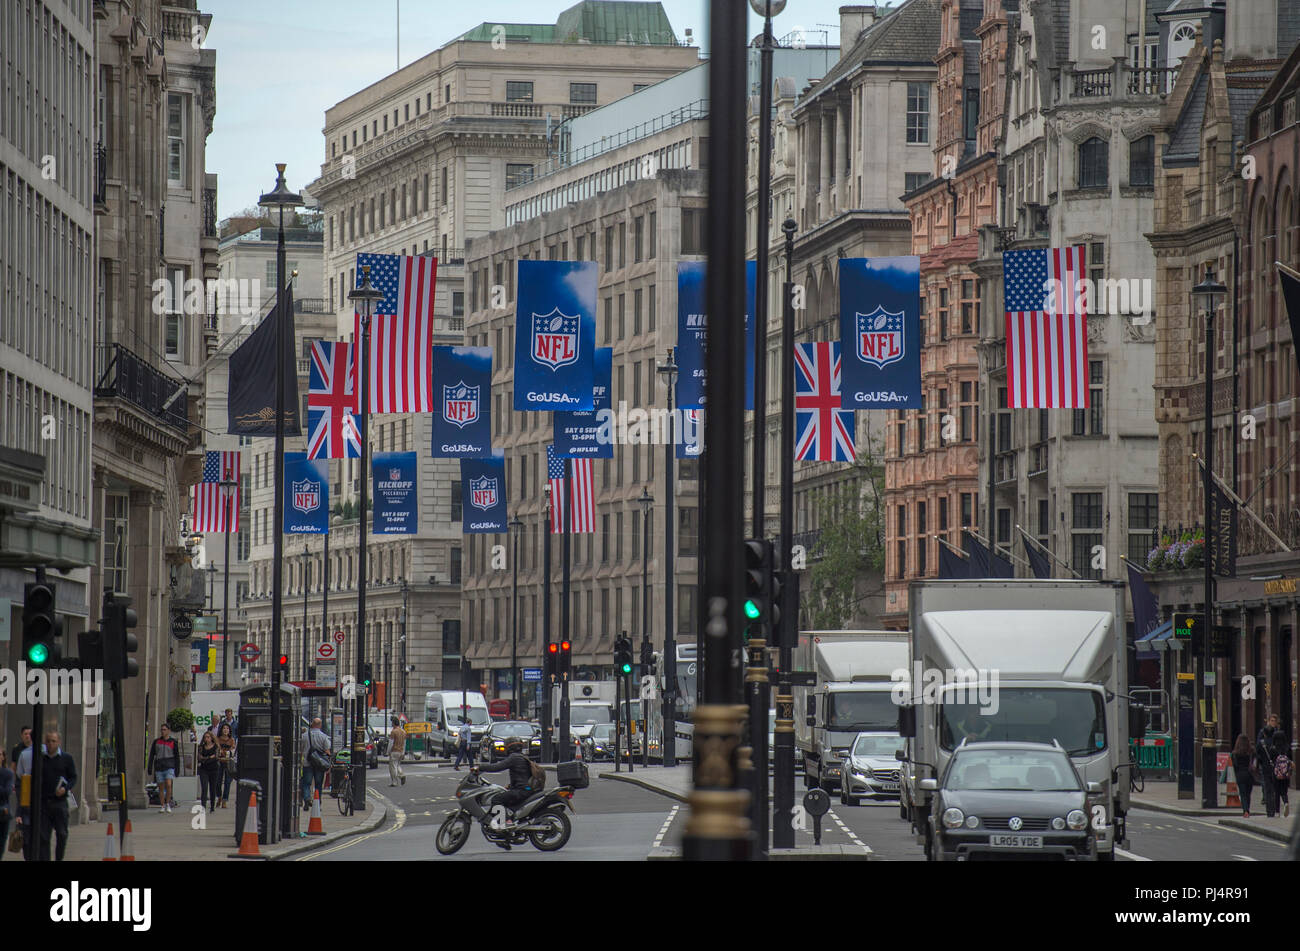 Flags fly in Piccadilly as The National Football League (NFL) will take over one of London’s most iconic locations on Saturday 8 September. Stock Photo